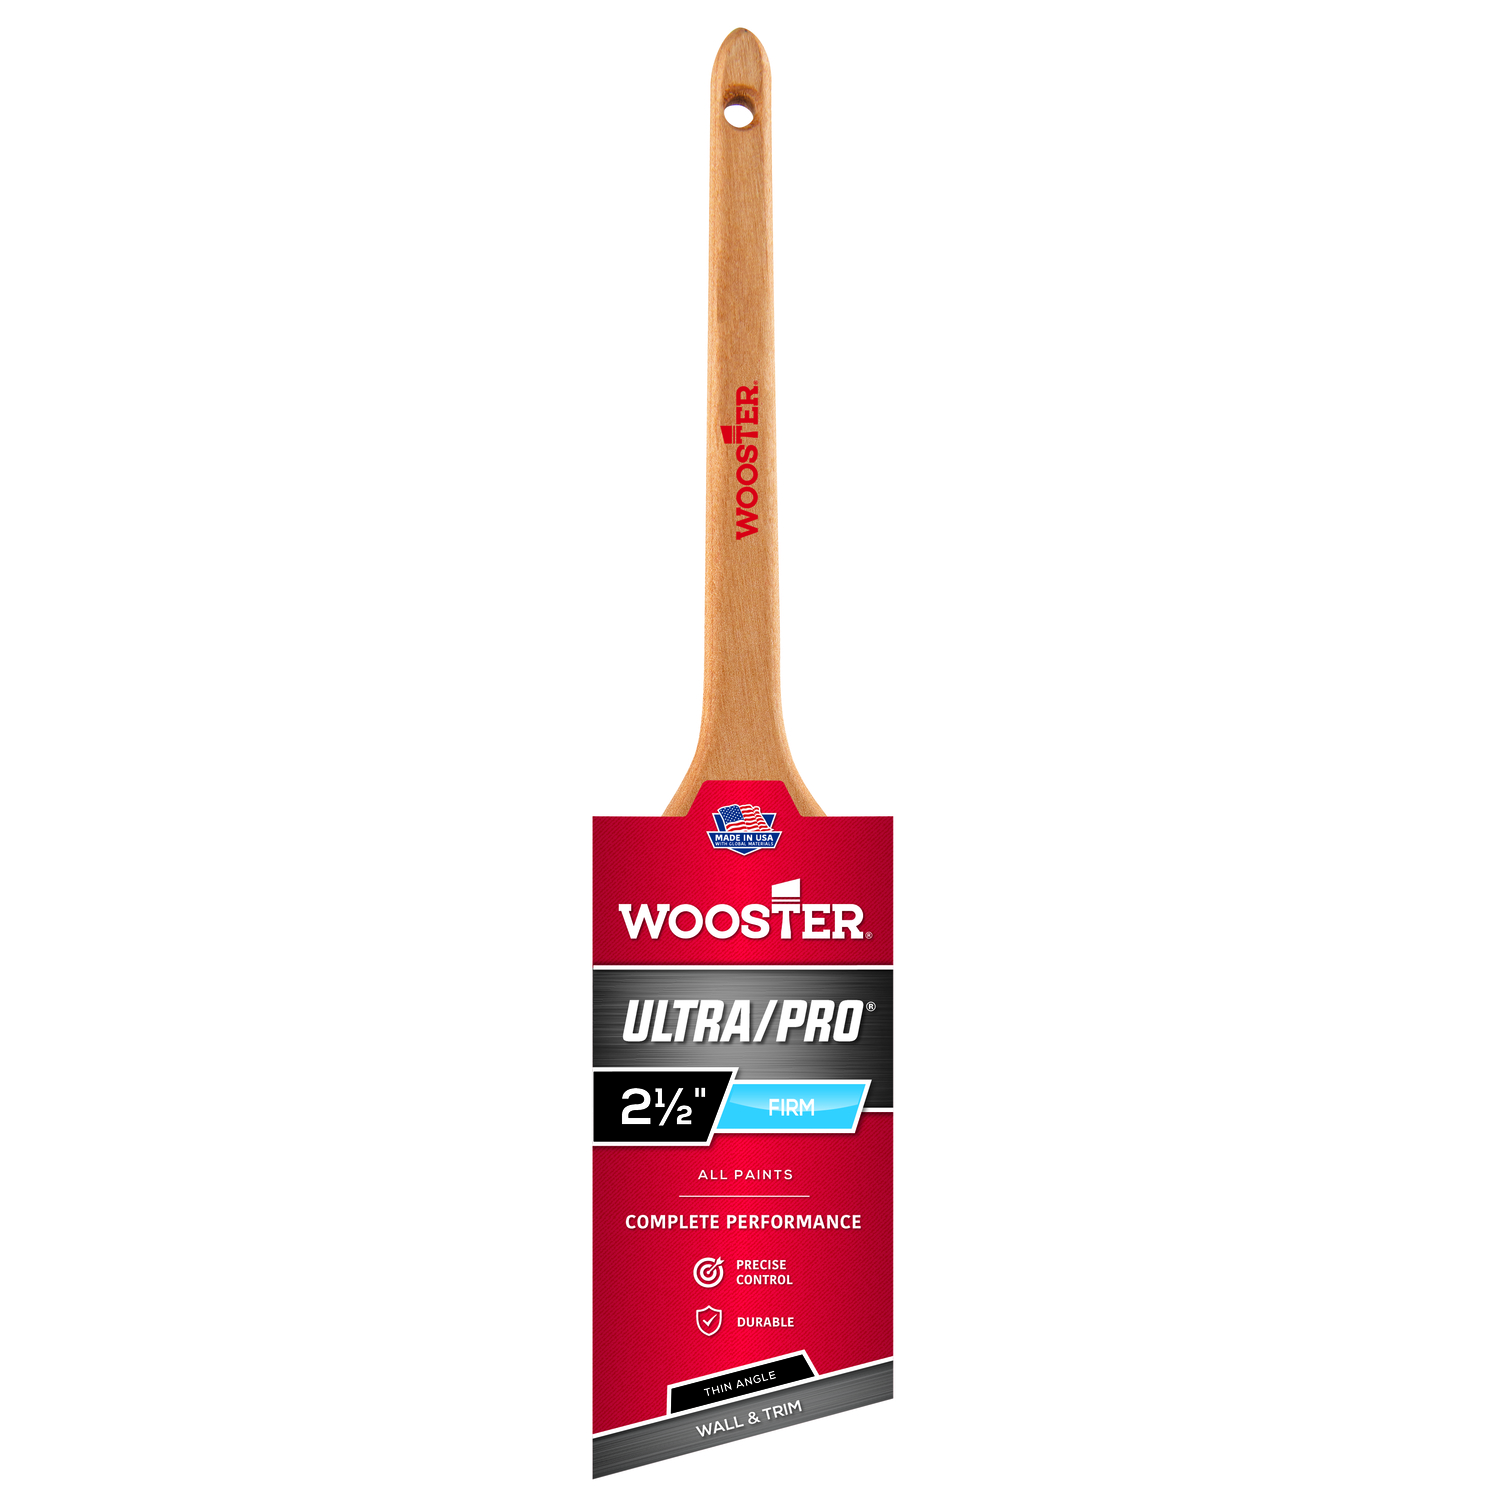 Photos - Putty Knife / Painting Tool Wooster Ultra/Pro 2-1/2 in. Angle Paint Brush 4181-2.5